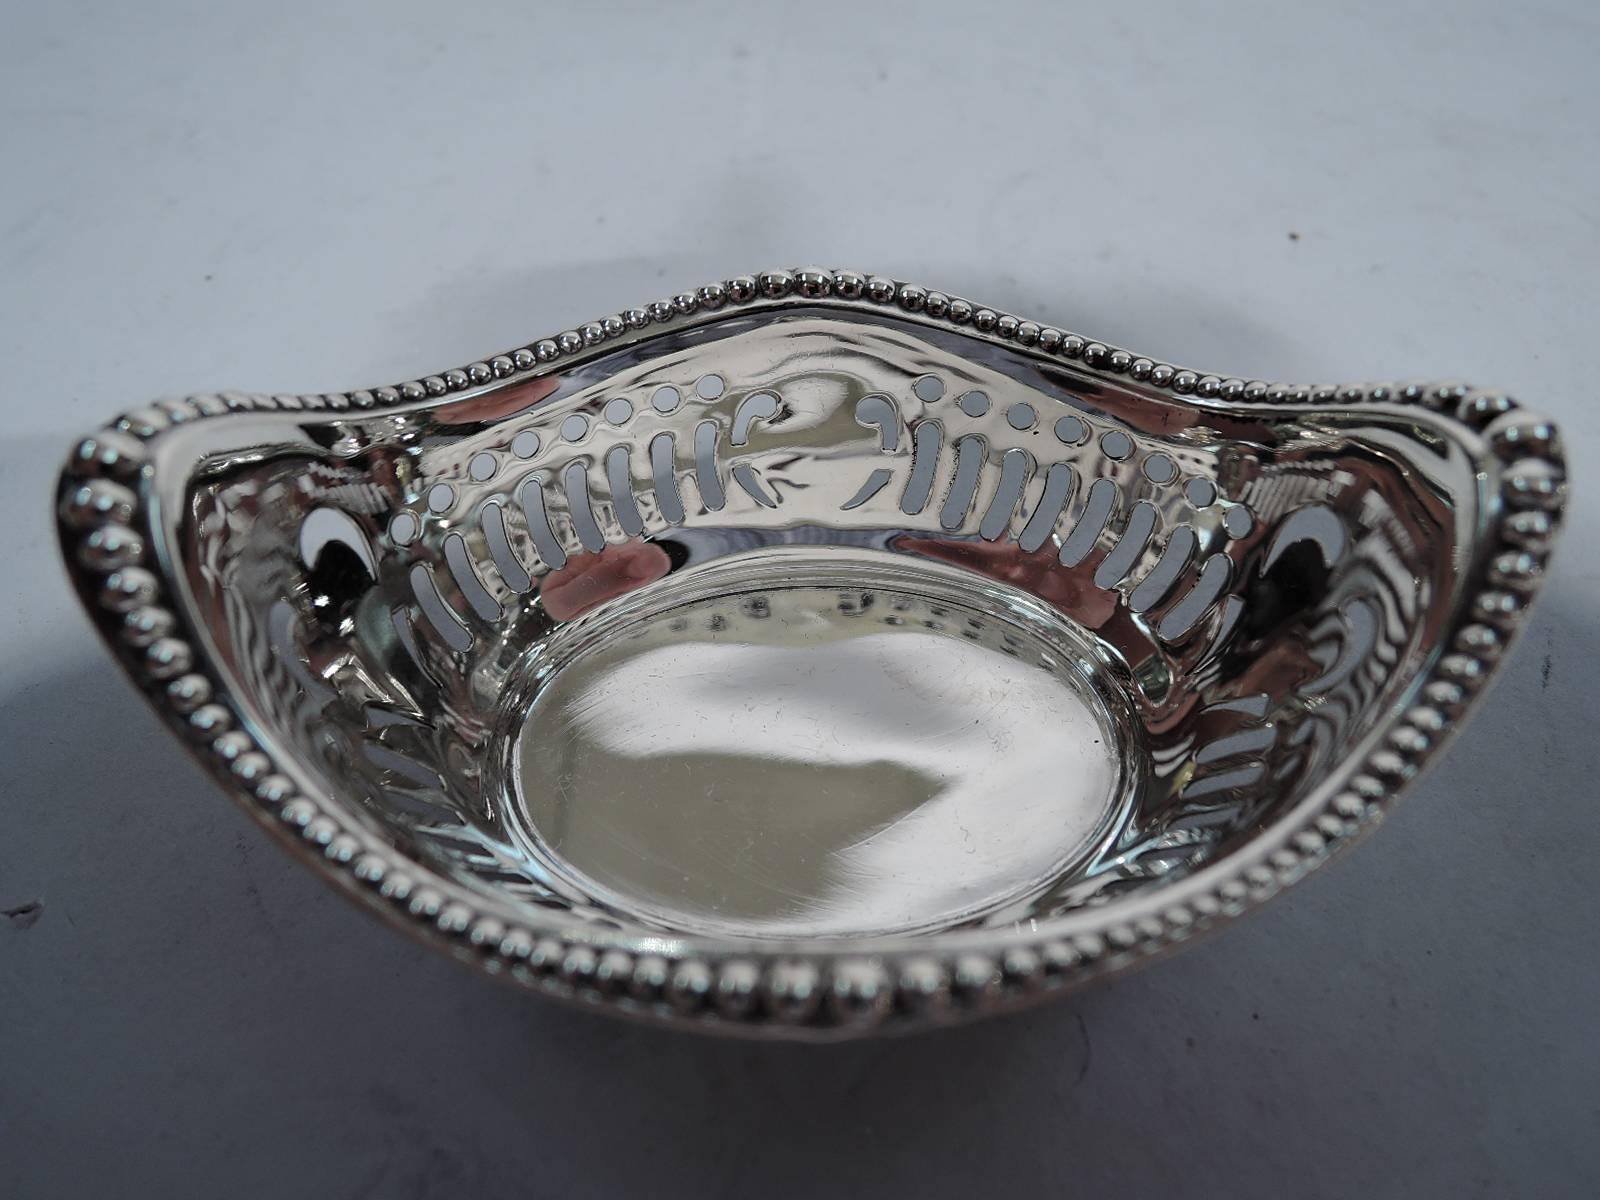 Set of six sterling silver nut dishes. Made by Gorham in Providence, circa 1920. Each: boat form with pierced sides and beaded rim. Hallmark includes no. A4775. Very good condition.

Dimensions: H 1 3/8 x W 3 1/4 x D 2 1/4 in. Total weight: 4.5